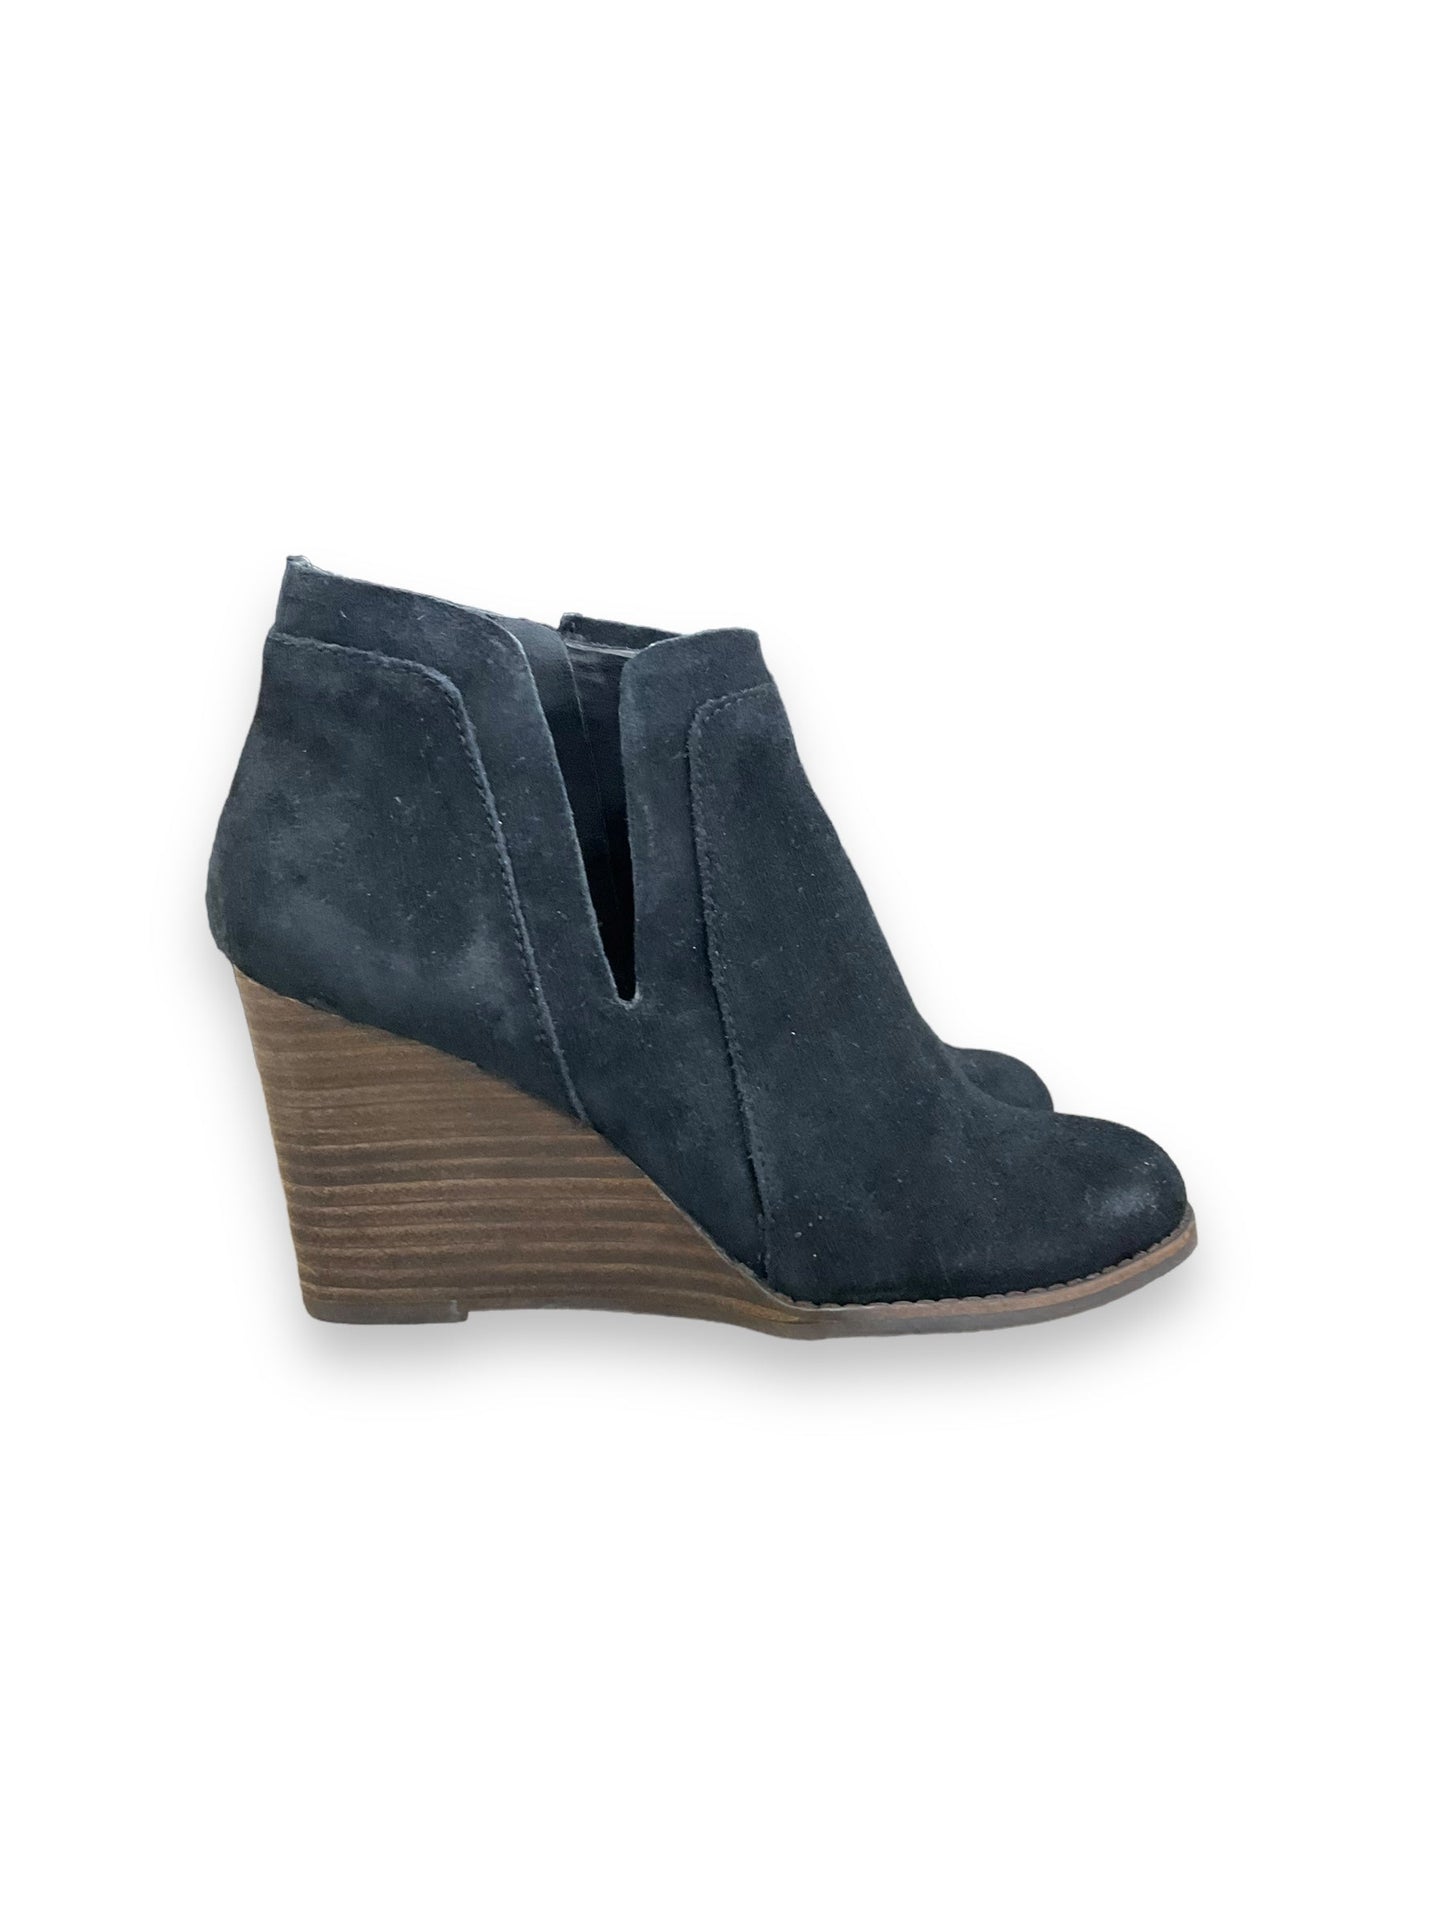 Shoes Heels Wedge By Lucky Brand  Size: 7.5